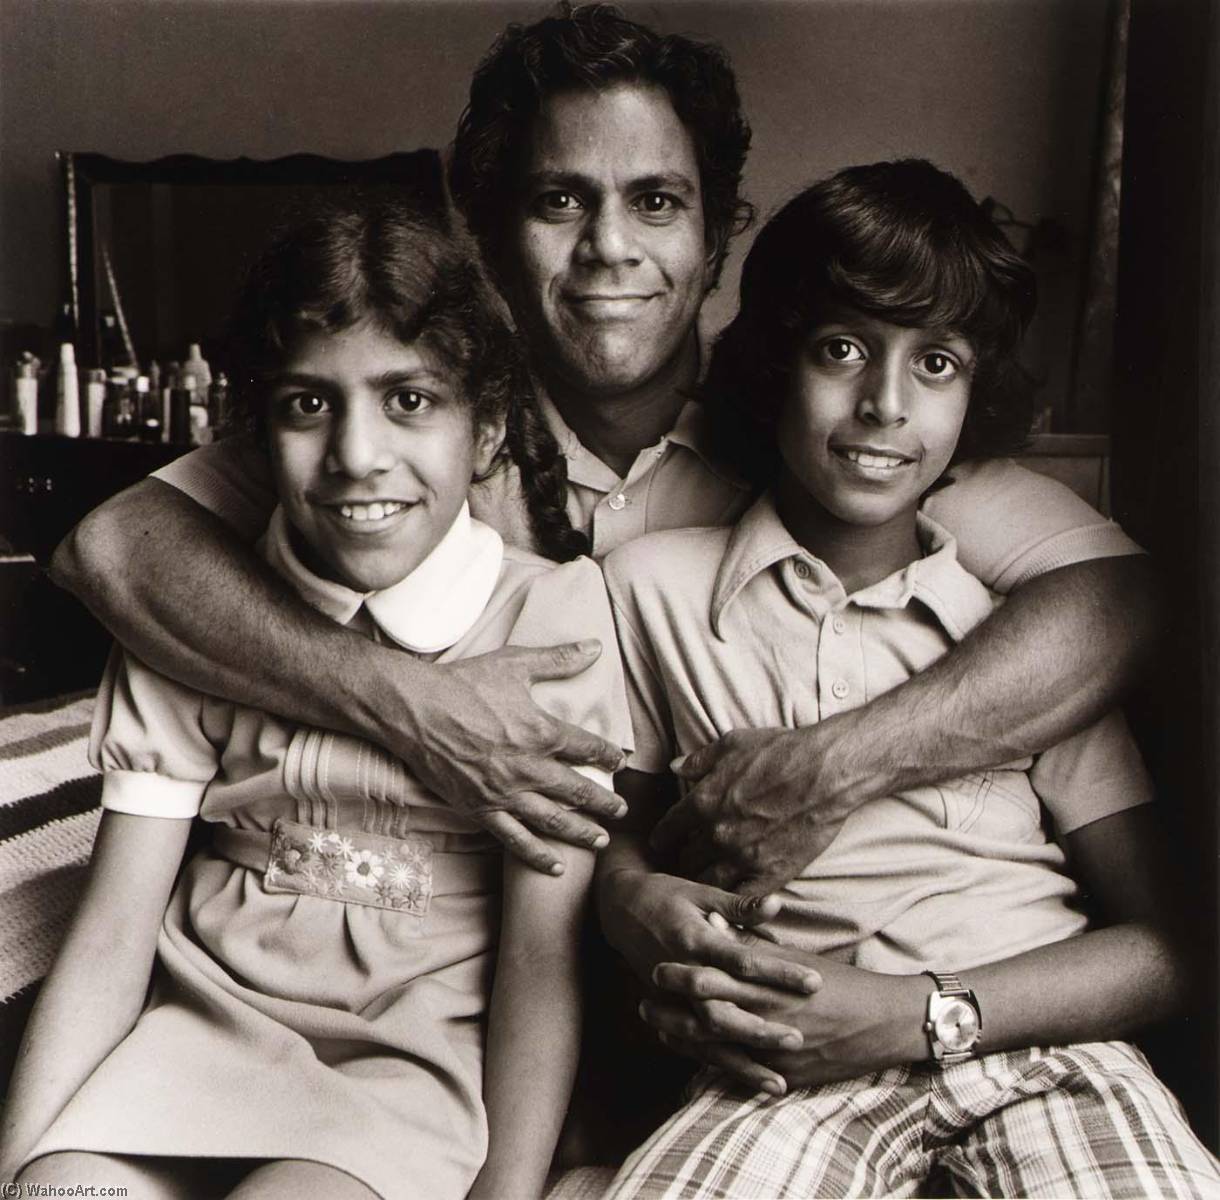 Murty, Ananta, and Santhi Hejeebu, from the East Baltimore Documentary Survey Project, 1979 by Linda Rich Linda Rich | ArtsDot.com